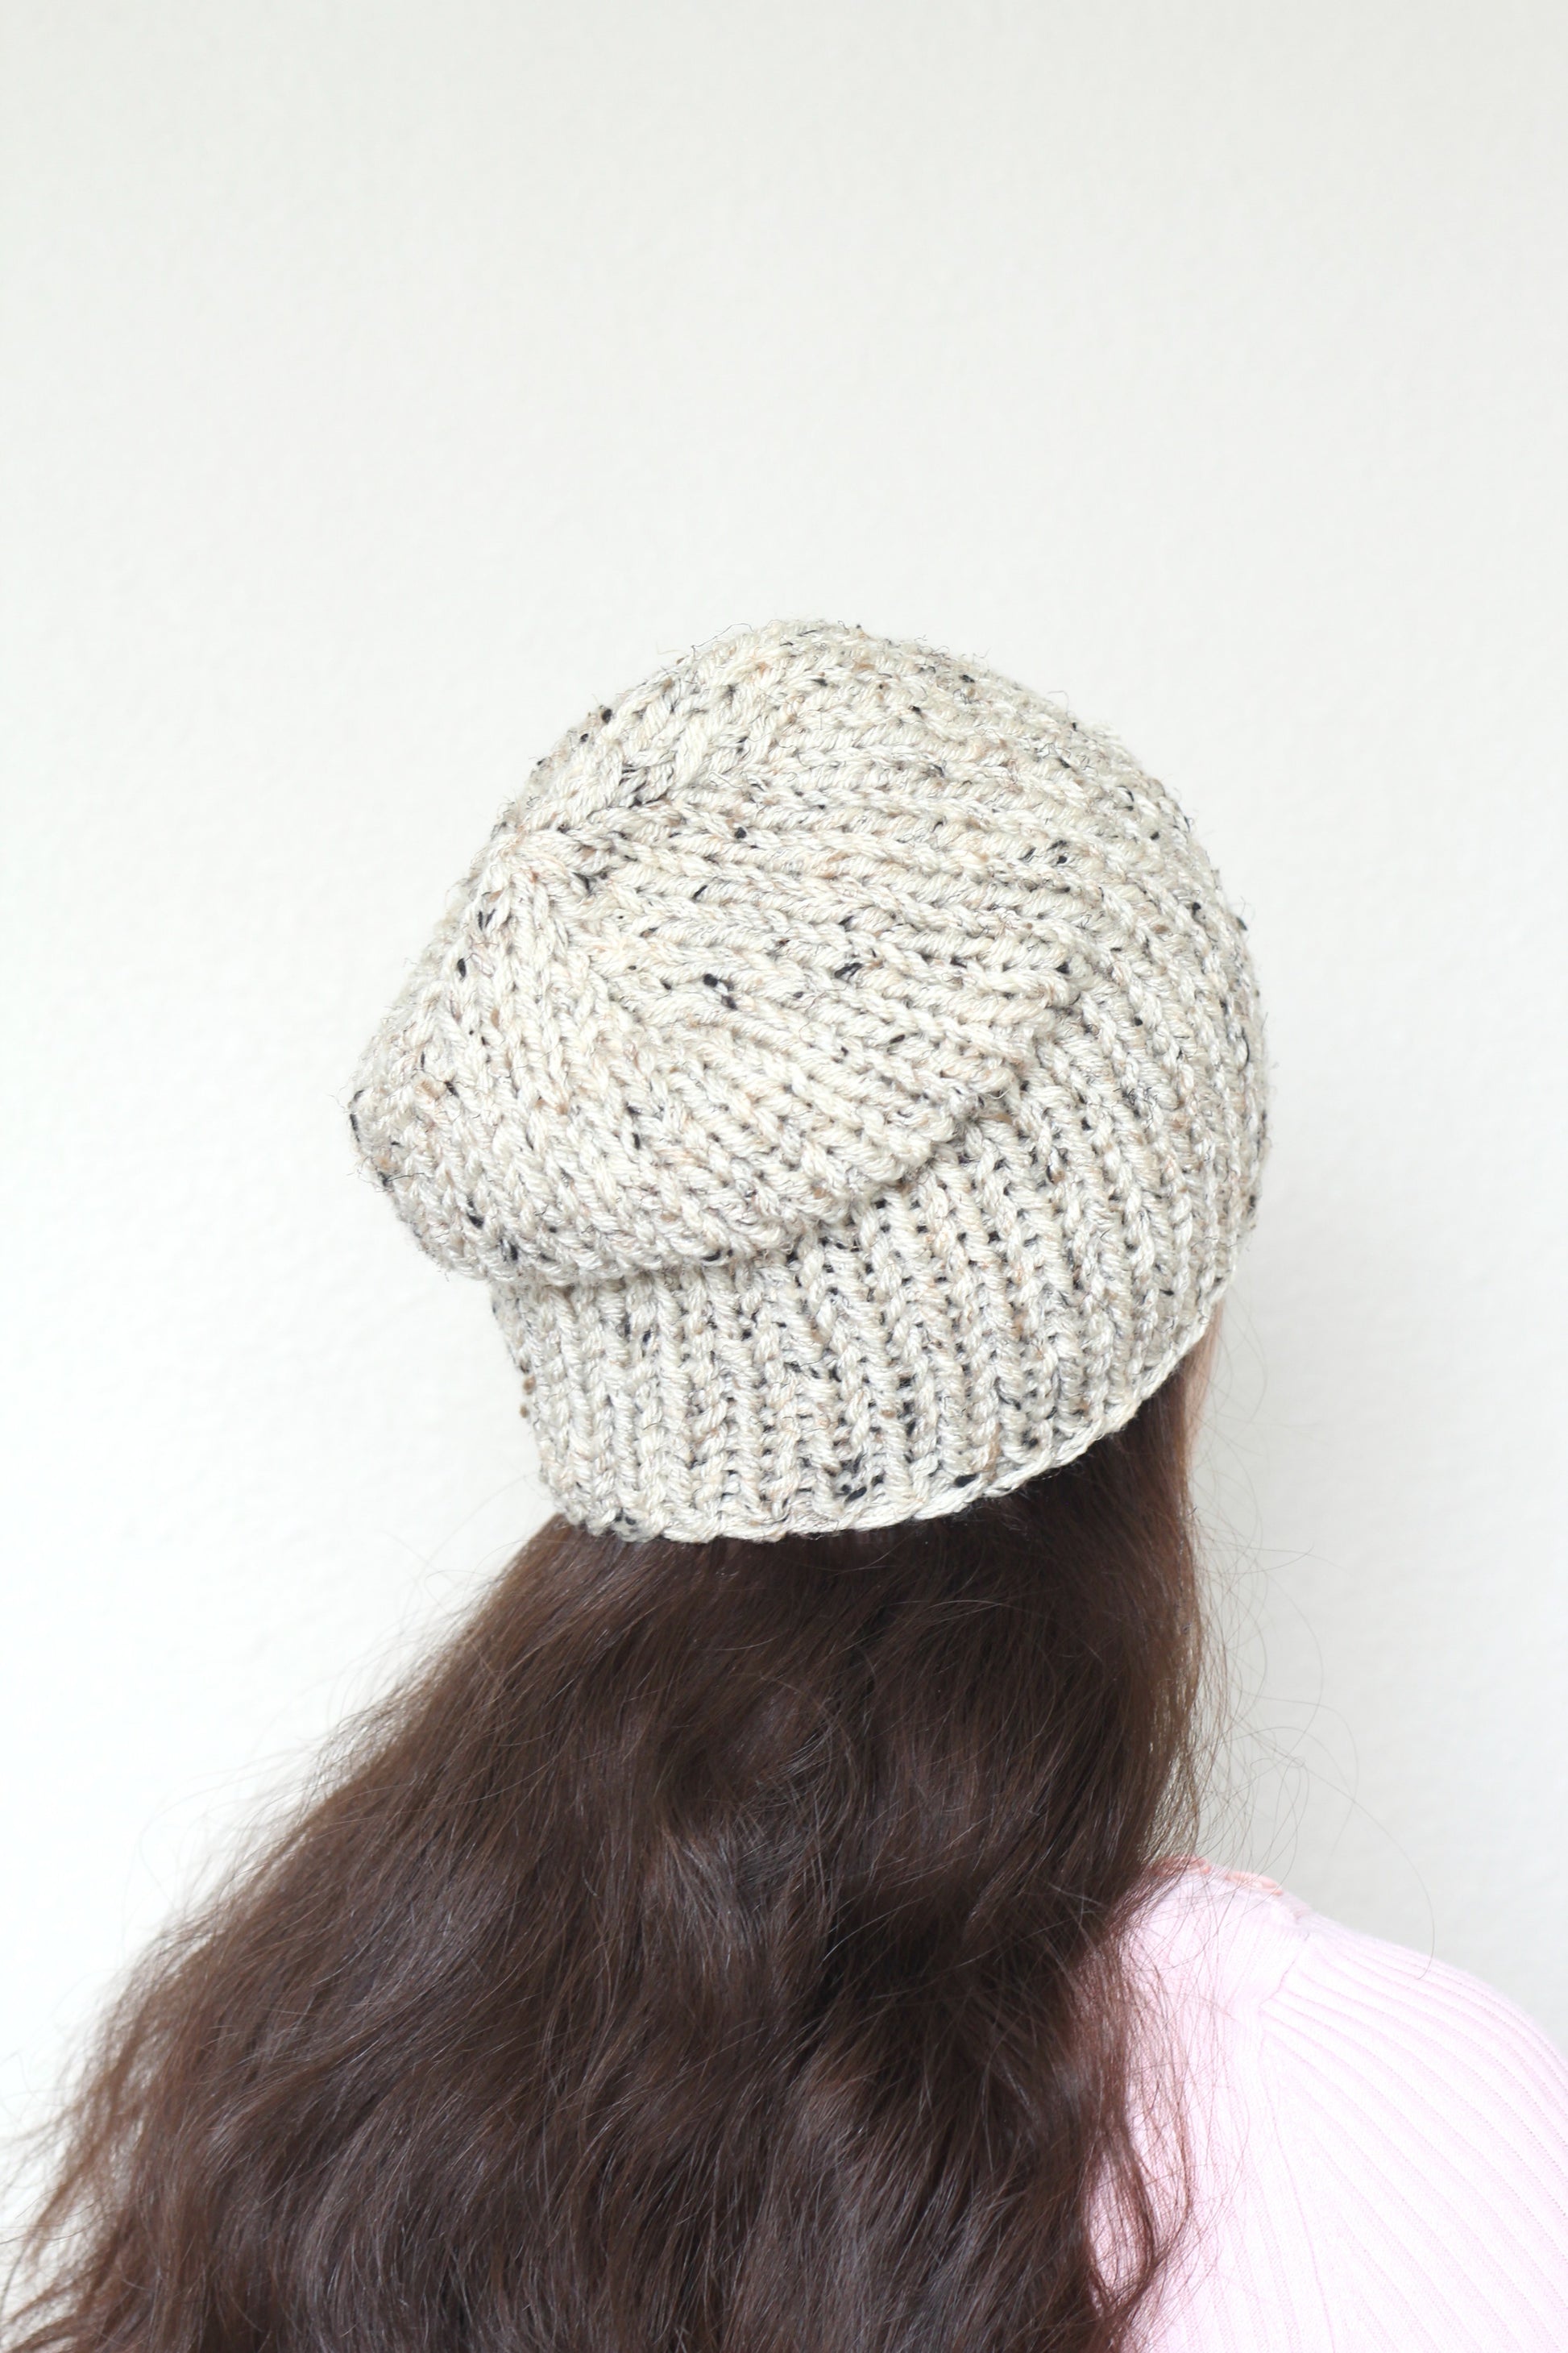 Beanie hat, knit hat, slouchy hat, knit beanie in olive green color